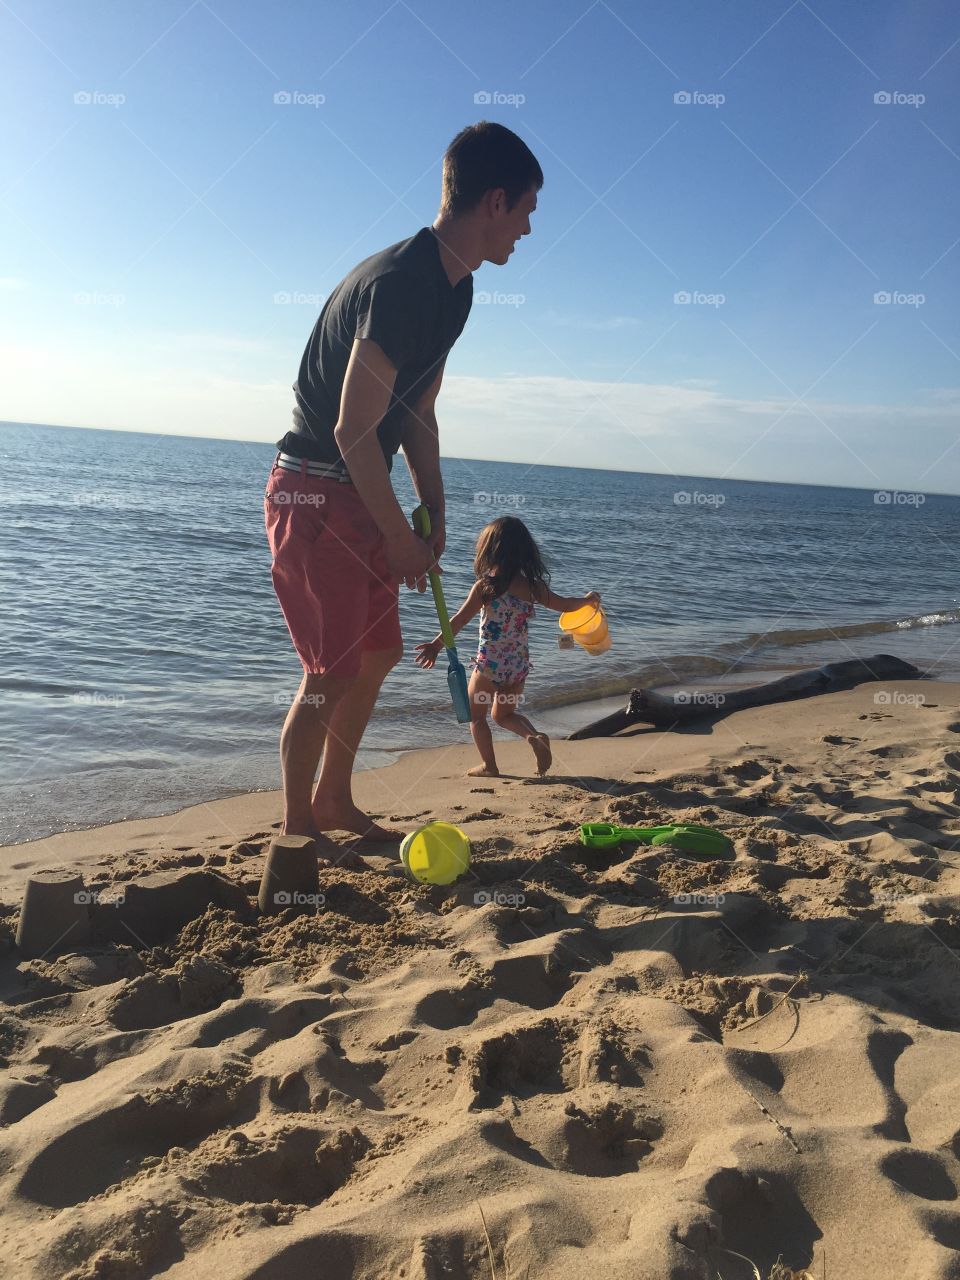 Fun in the sun. Dad and daughter on the beach playing in the sand. 